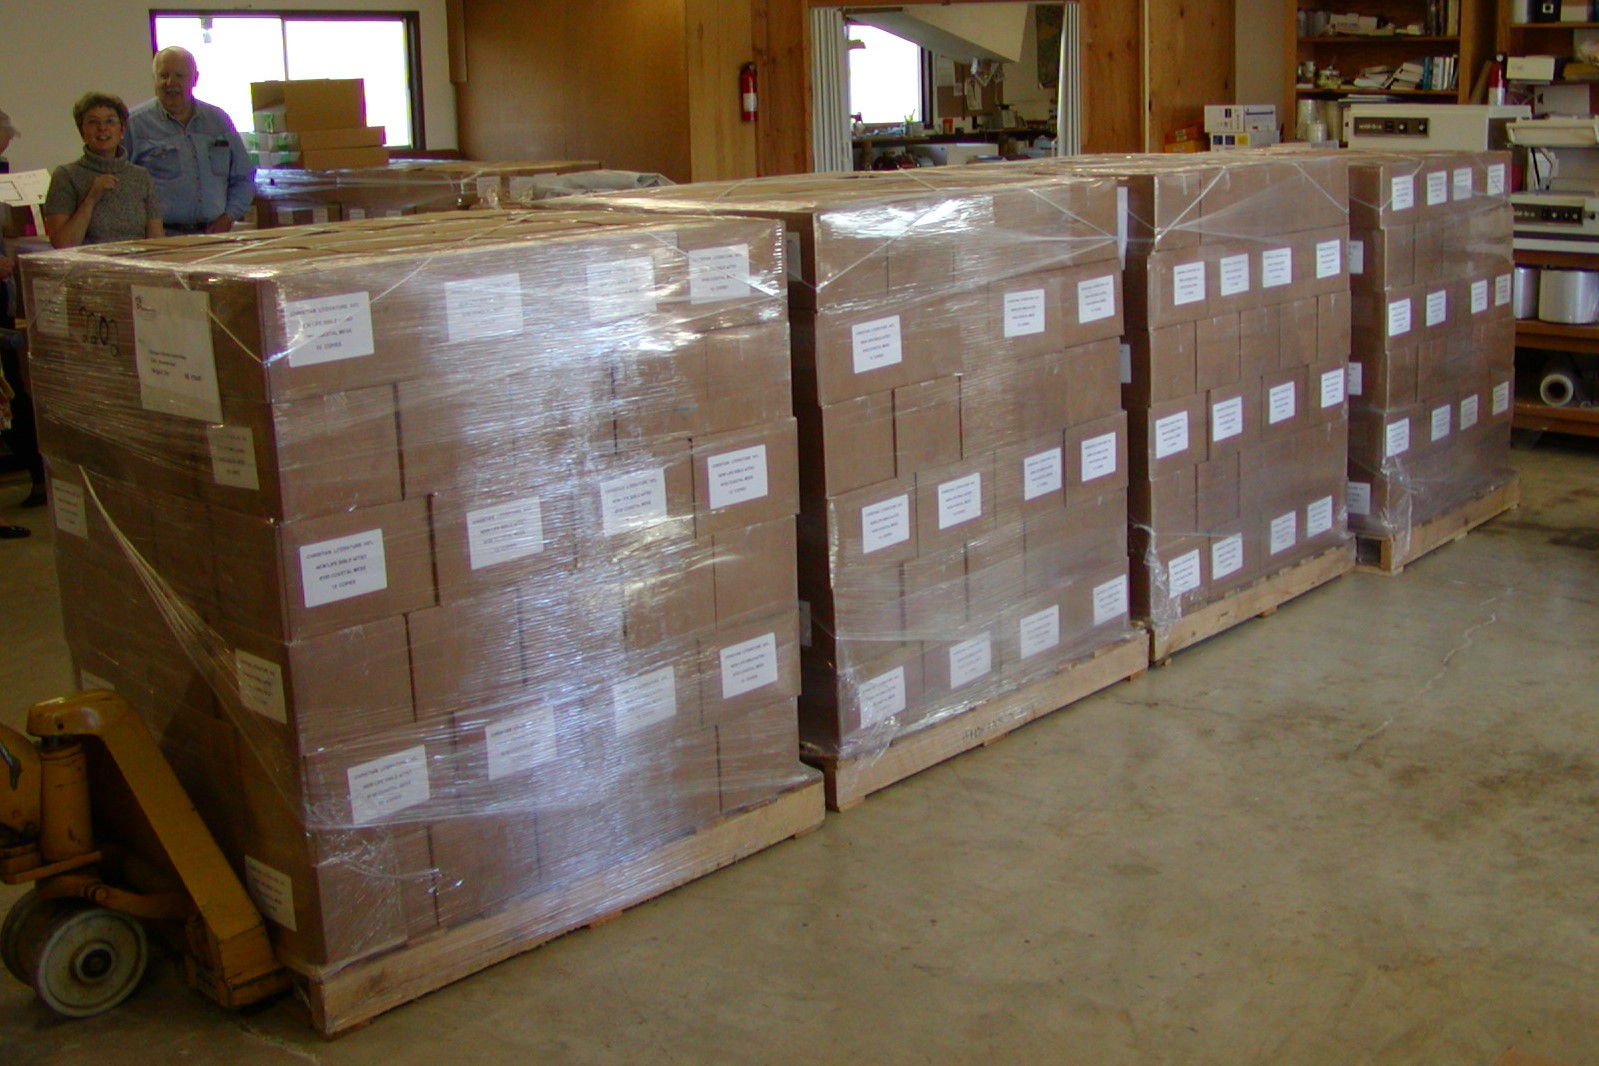 Cases of Compass Bibles